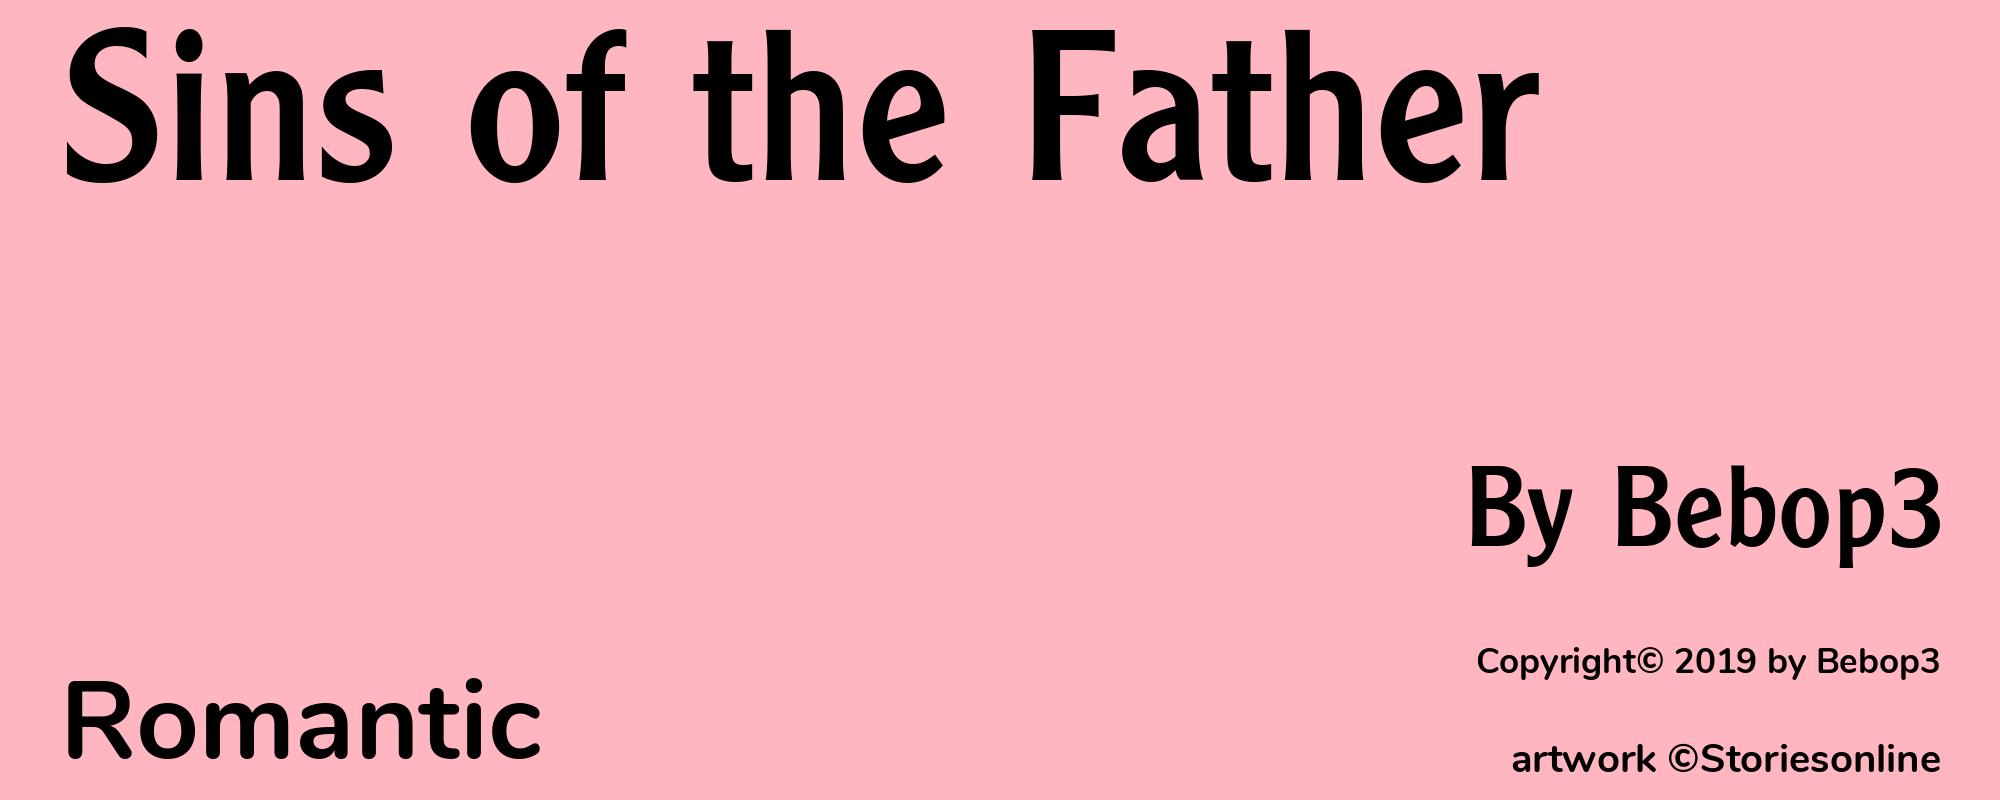 Sins of the Father - Cover